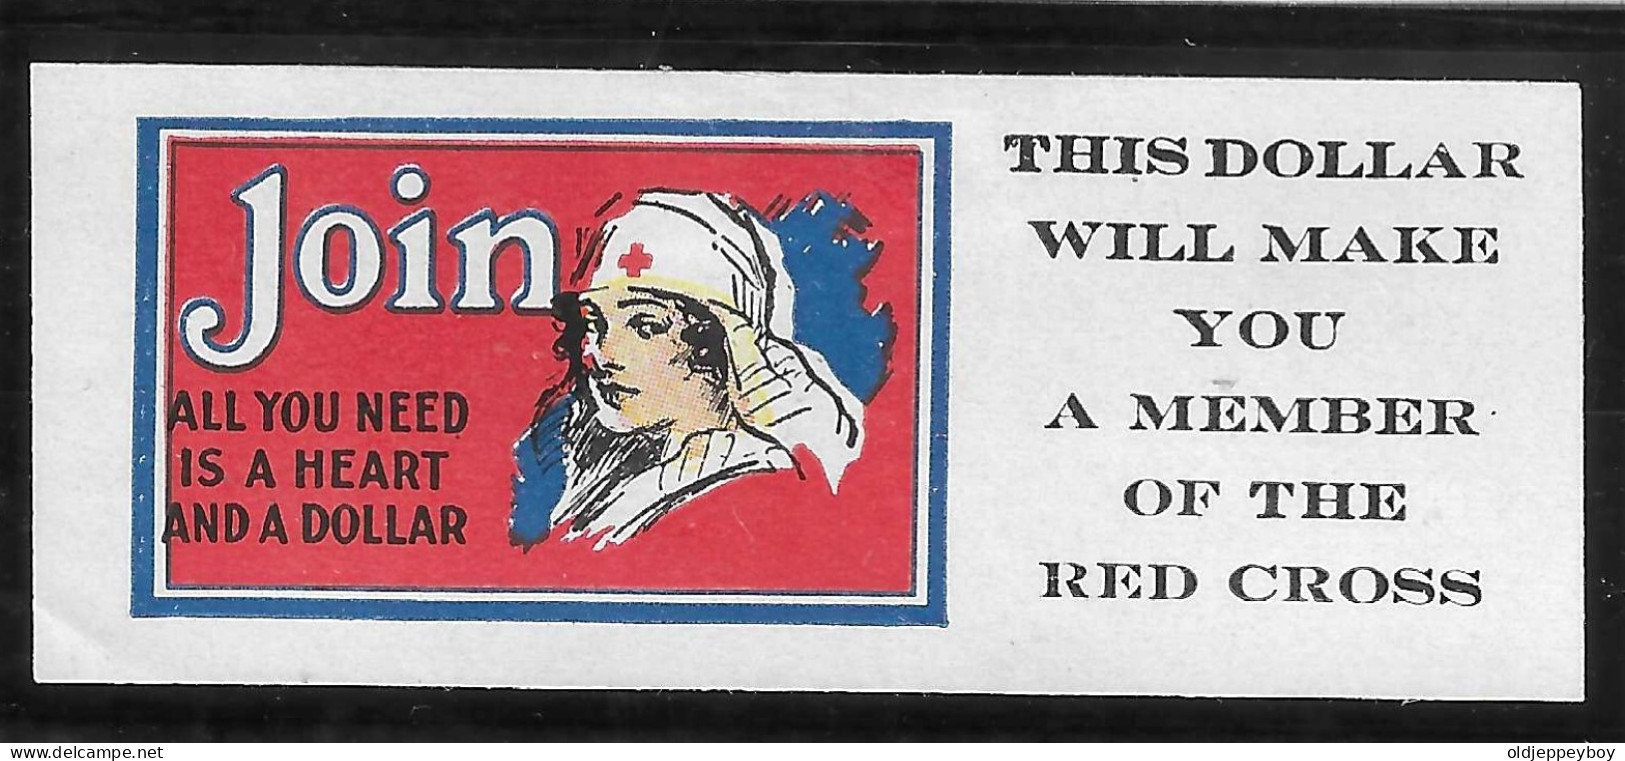 1919 VIGNETTE WW1 USA AMERICAN CROIX ROUGE ROUTE KREUZ JOIN THE RED CROSS WEAR A BUTTON A DOLLAR WILL MAKE YOU A MEMBER - Croce Rossa